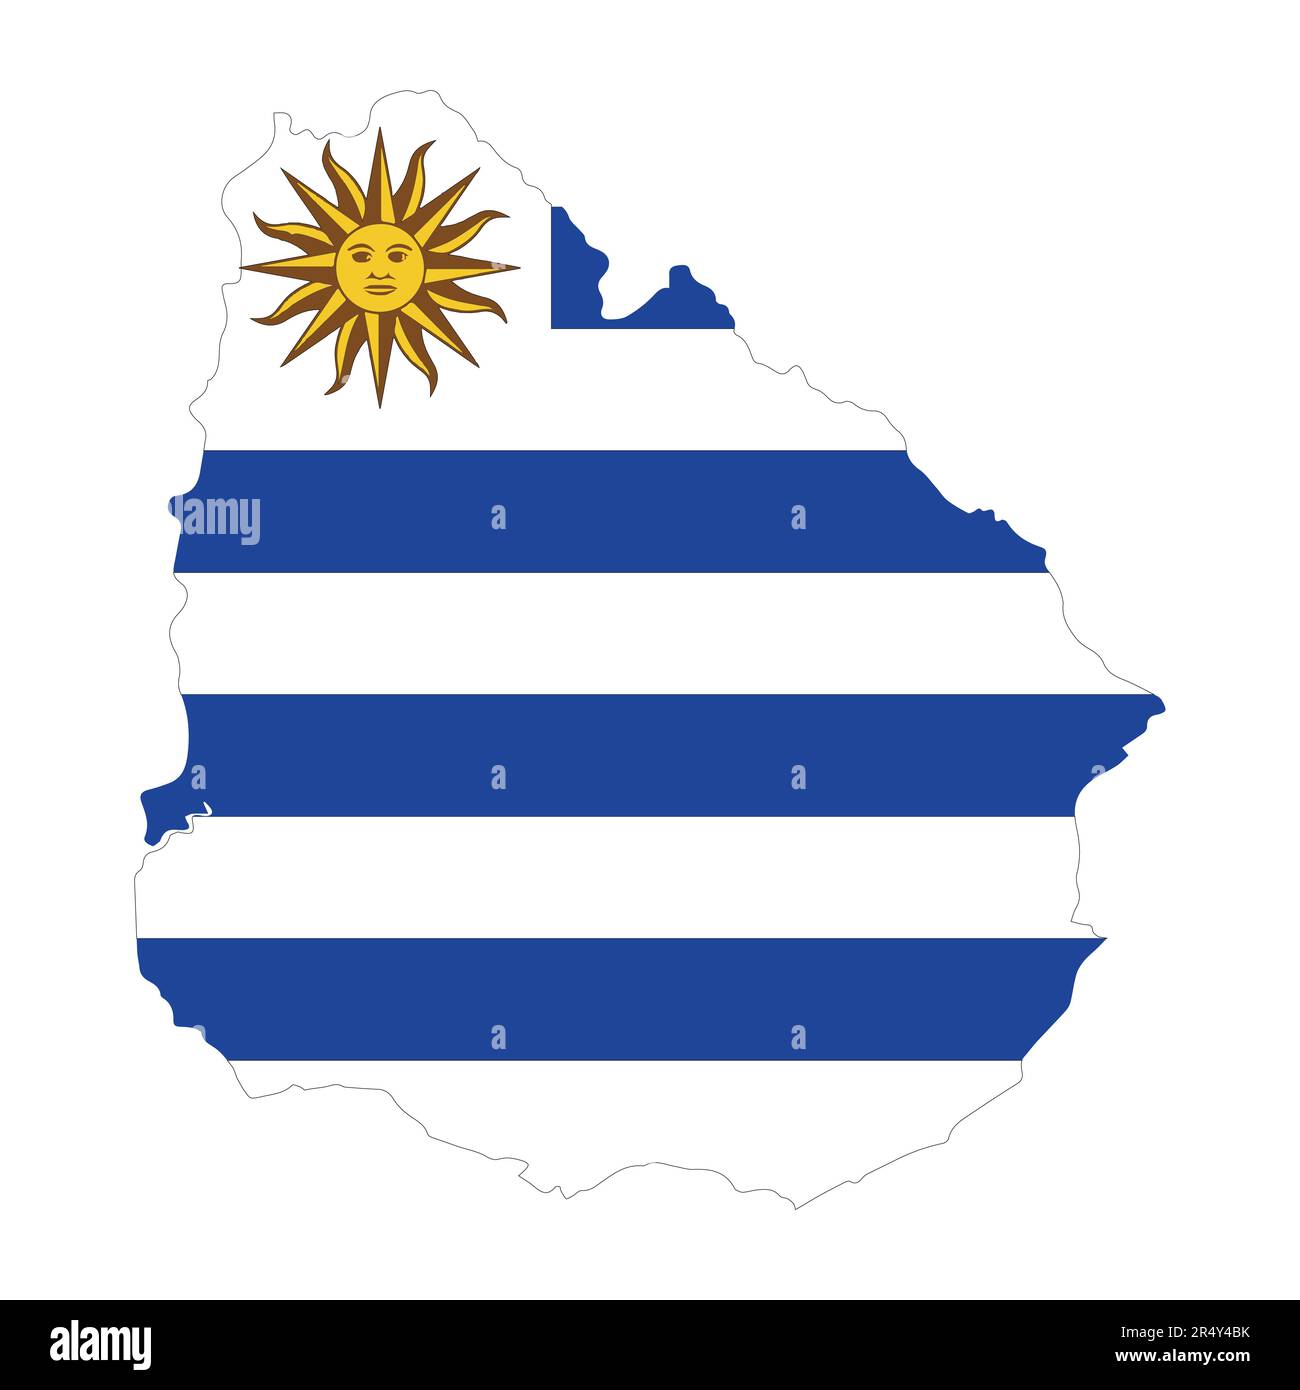 Uruguay Country in South America vector illustration flag and map logo design concept detailed Stock Vector